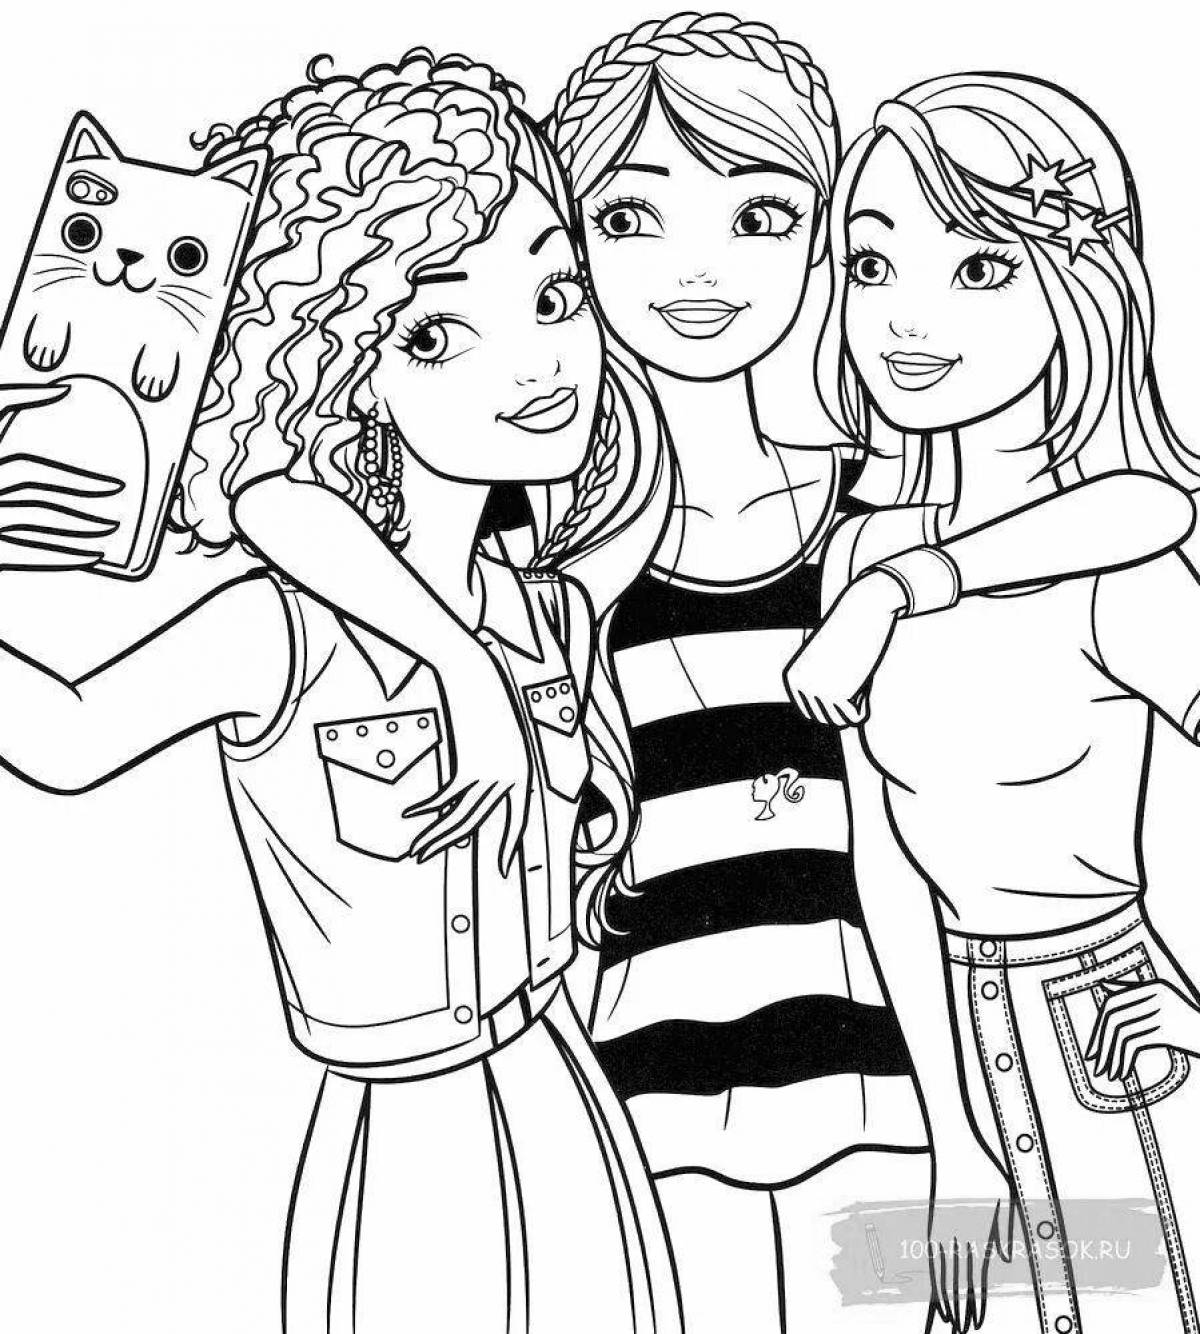 Charming coloring 12 for girls